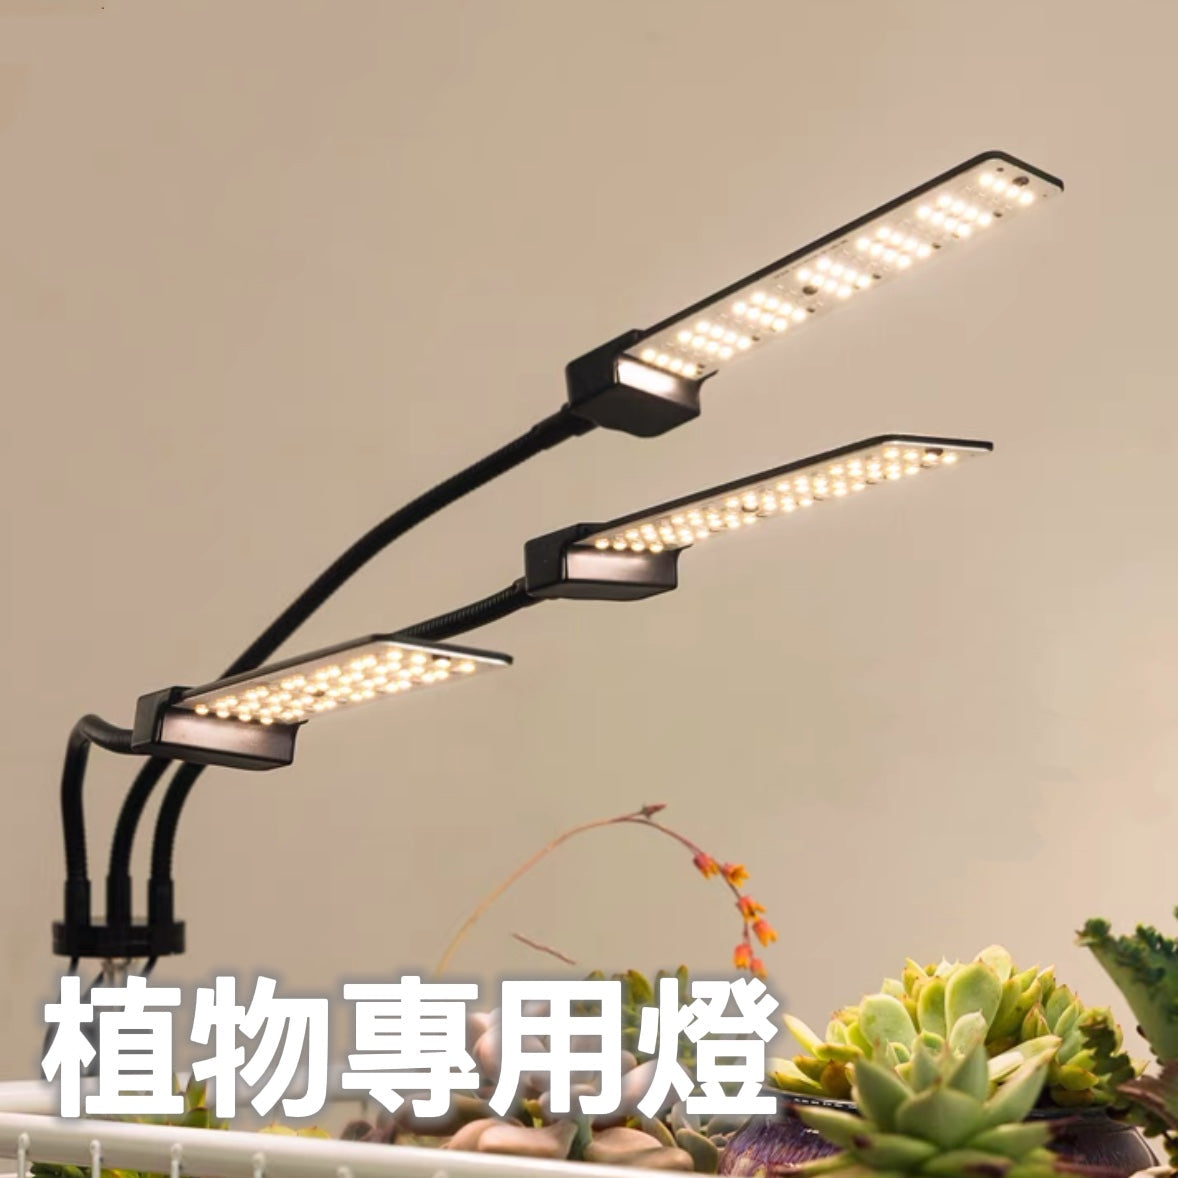 Special lamp for plants